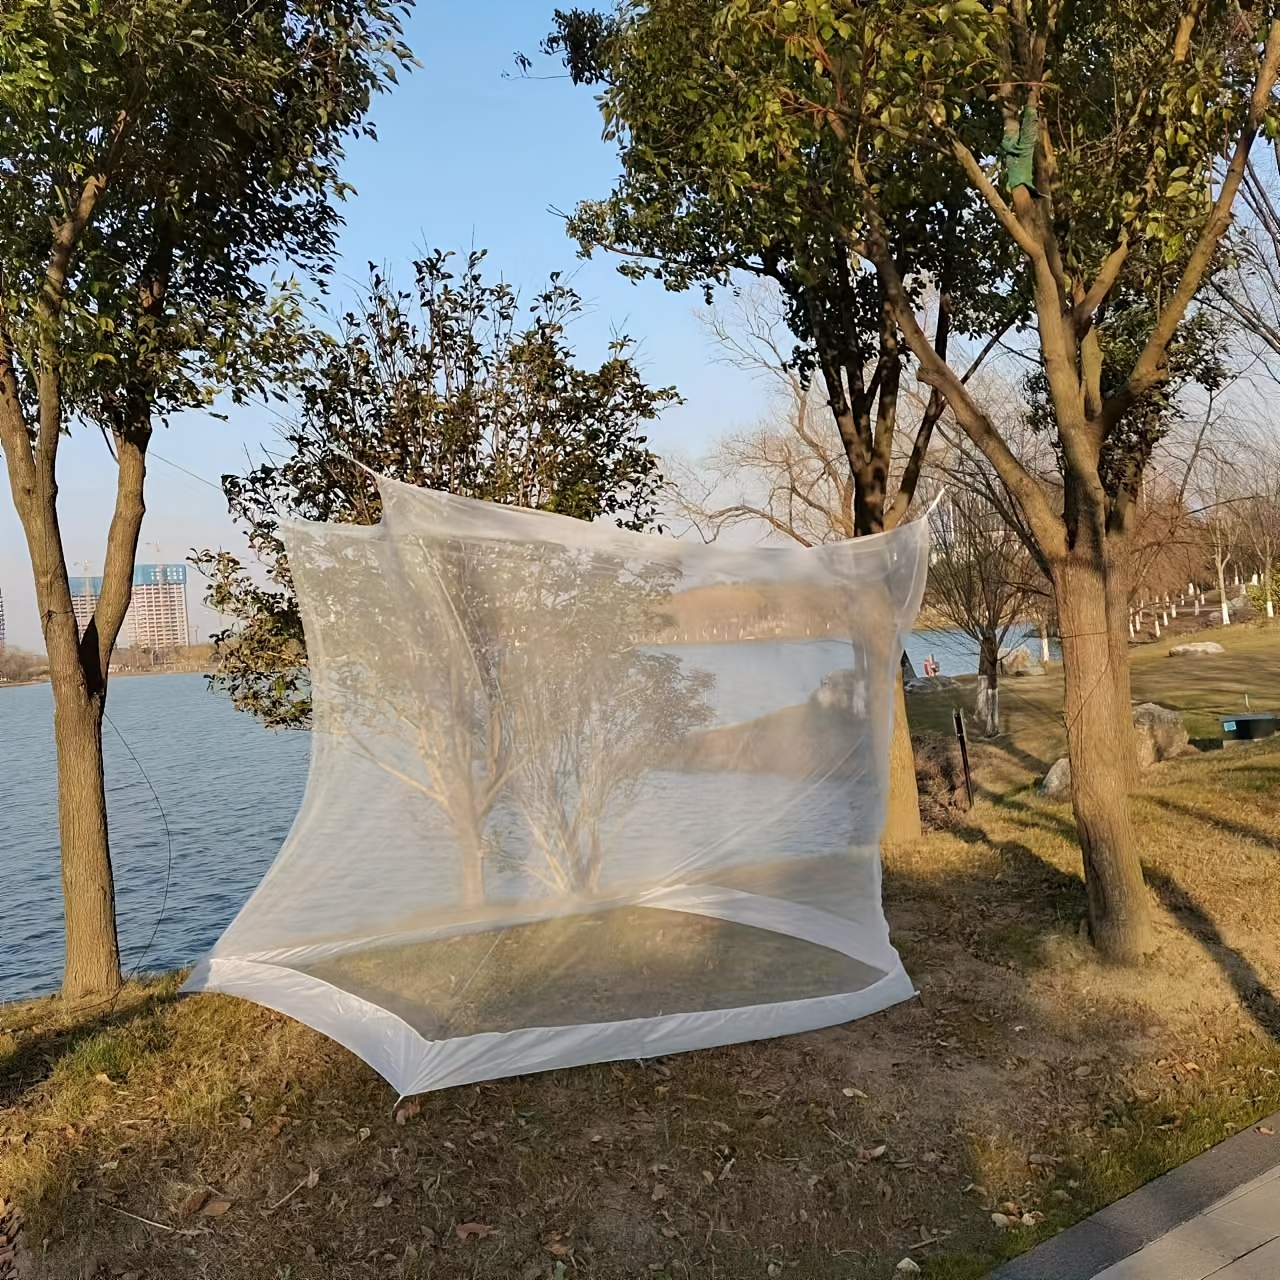 Cheap White Camping Mosquito Net Outdoor Anti-mosquito Insect Mesh Tent Net